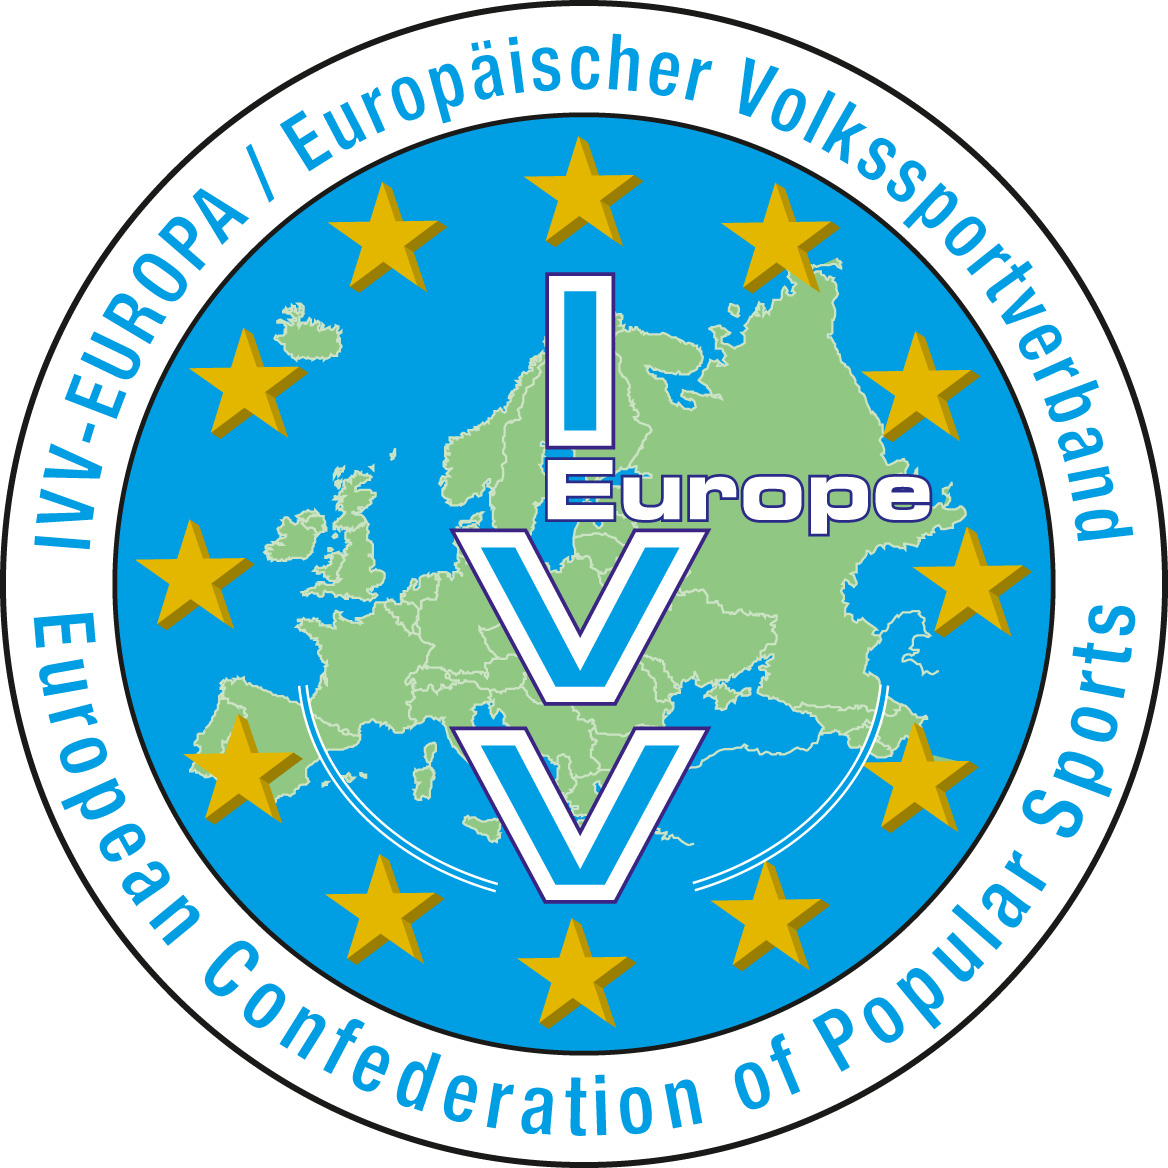 The IVV-Europe